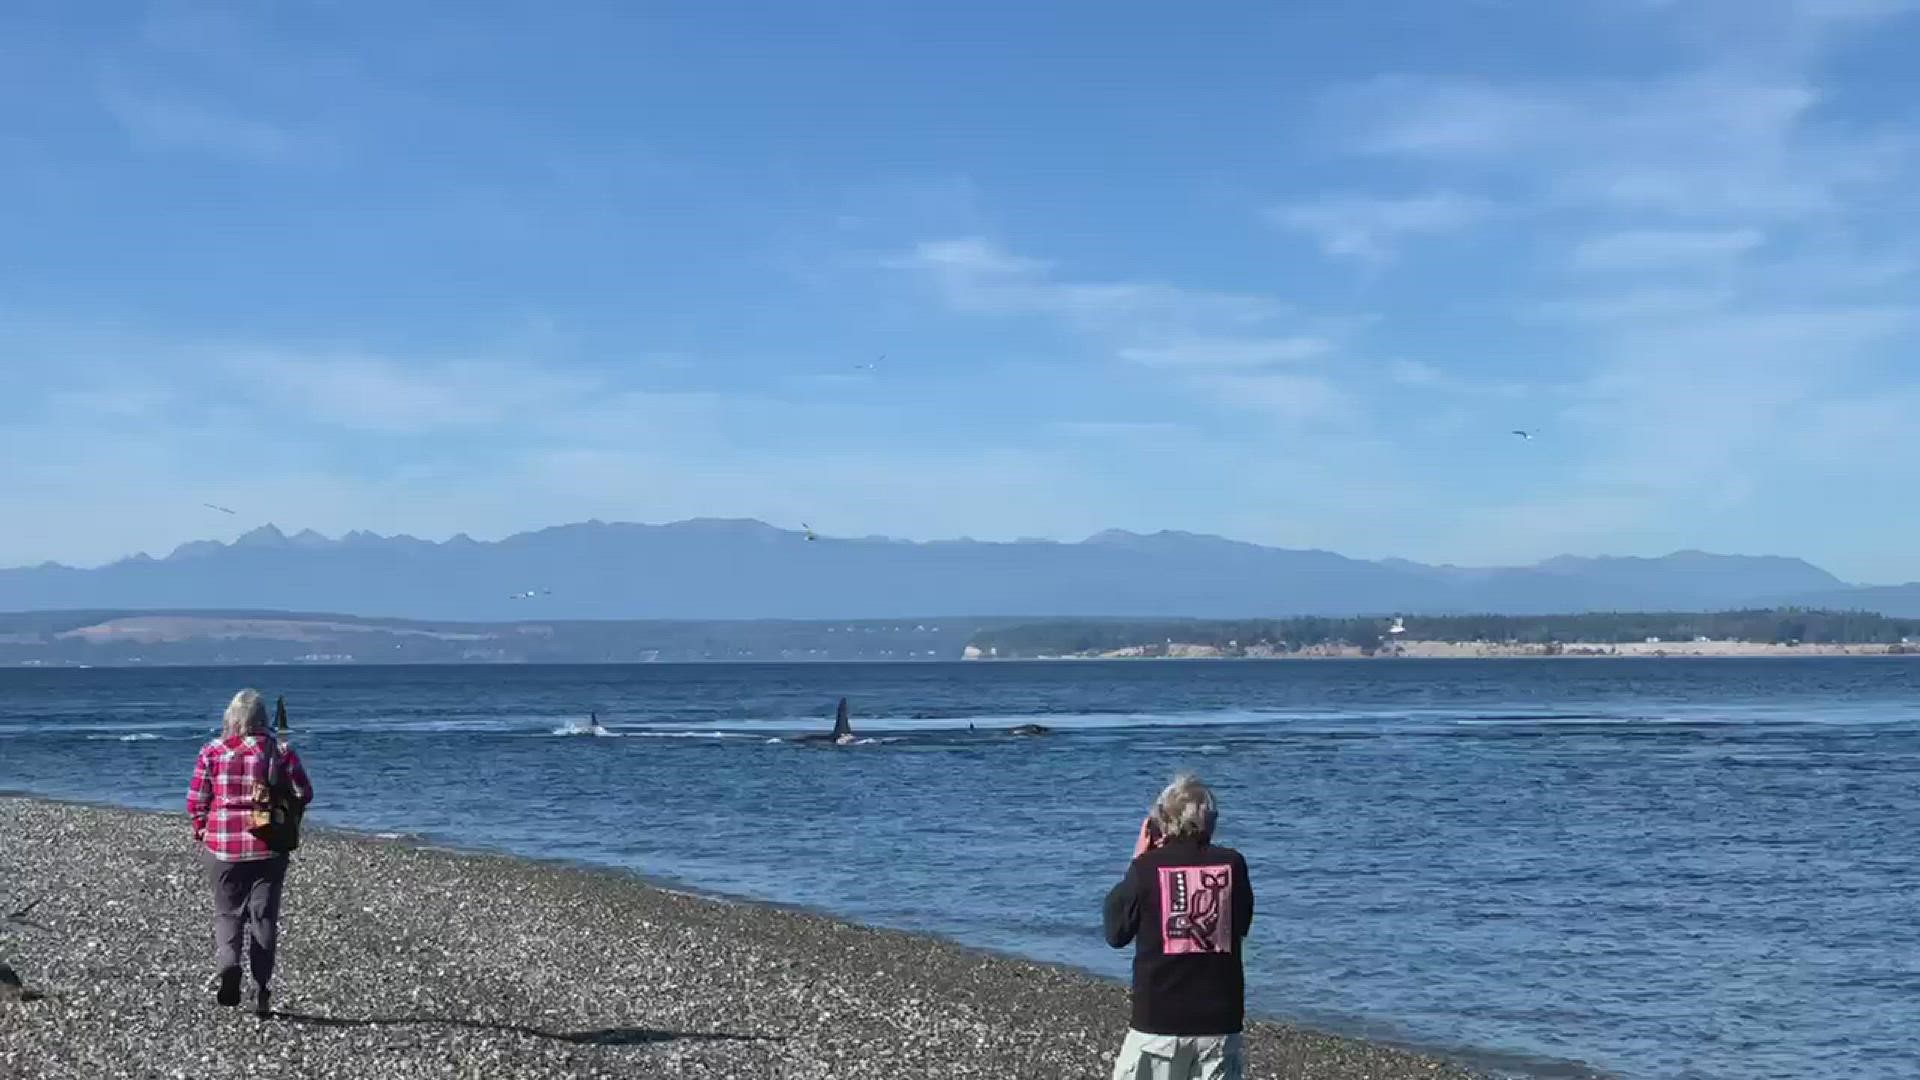 KING 5 viewer David Haeckel sent in video of Southern Resident orcas enjoying a swim near the Bush Point Lighthouse on Whidbey Island on Tuesday, Sept. 7, 2021.